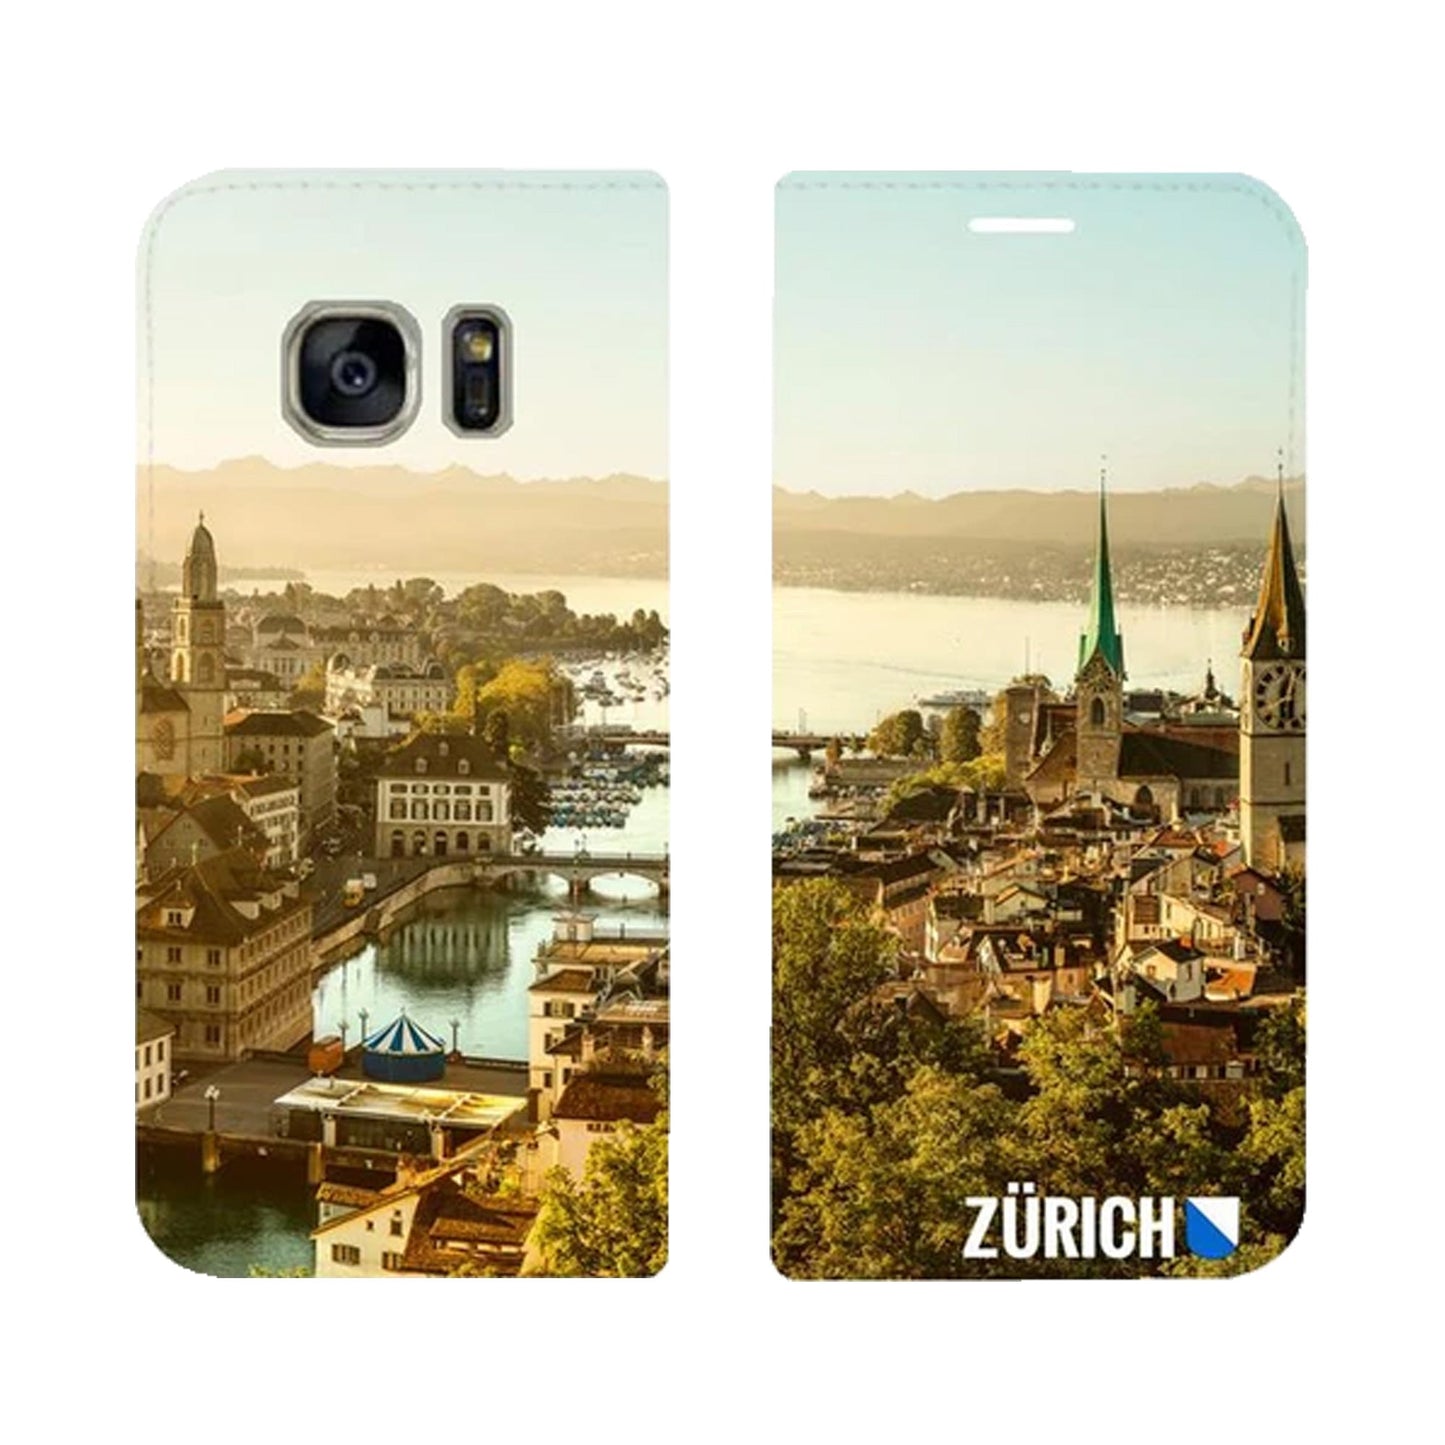 Zurich City from Above Panorama for Samsung Galaxy S7 Edge